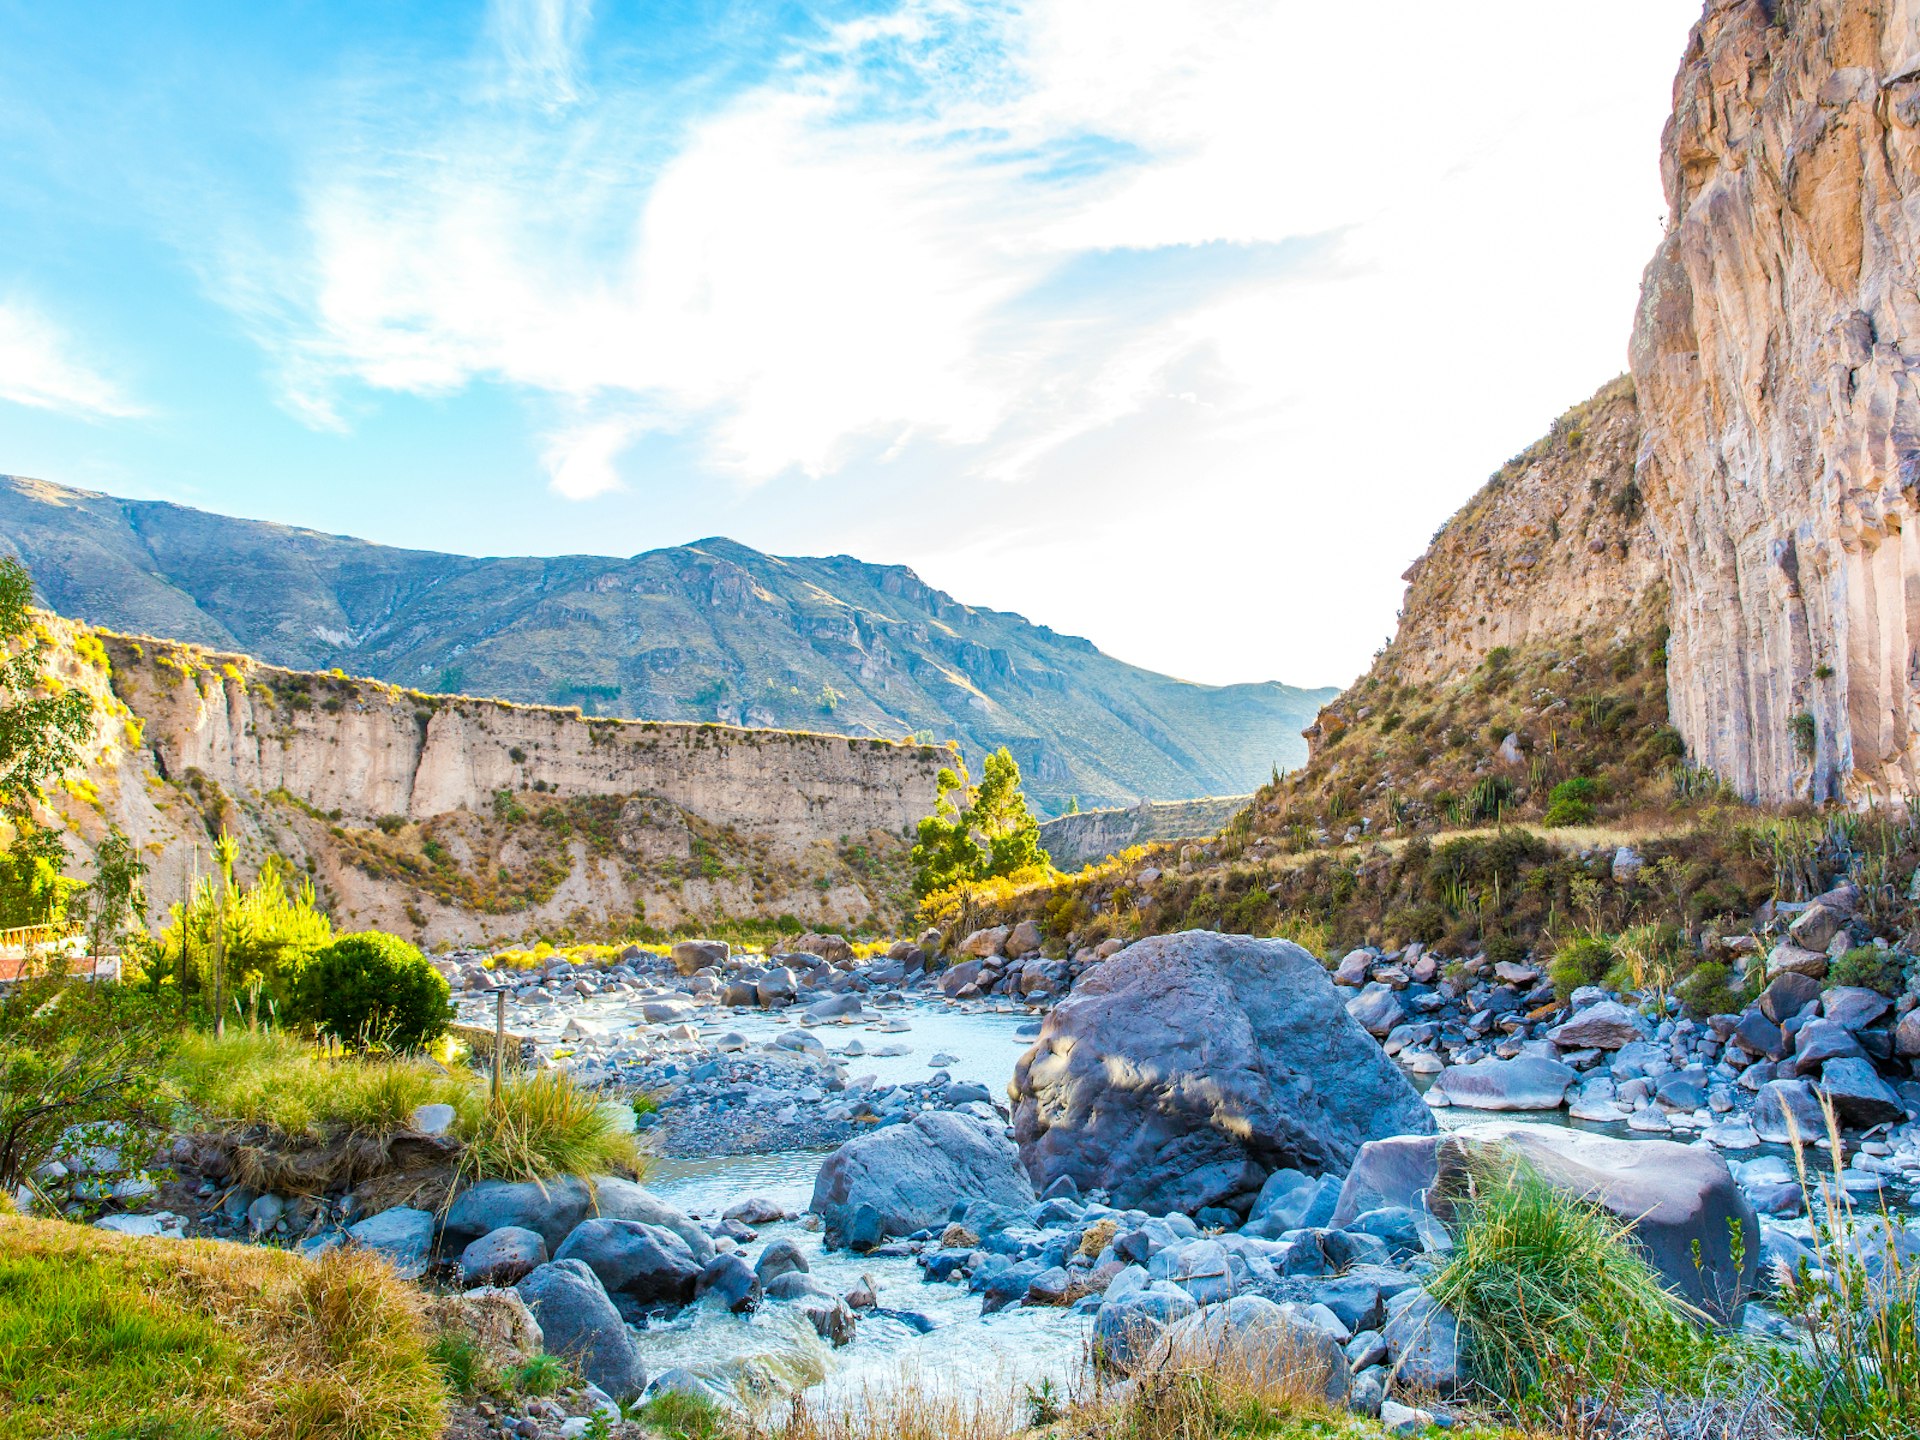 A mountain view from the bottom of the Colca Canyon